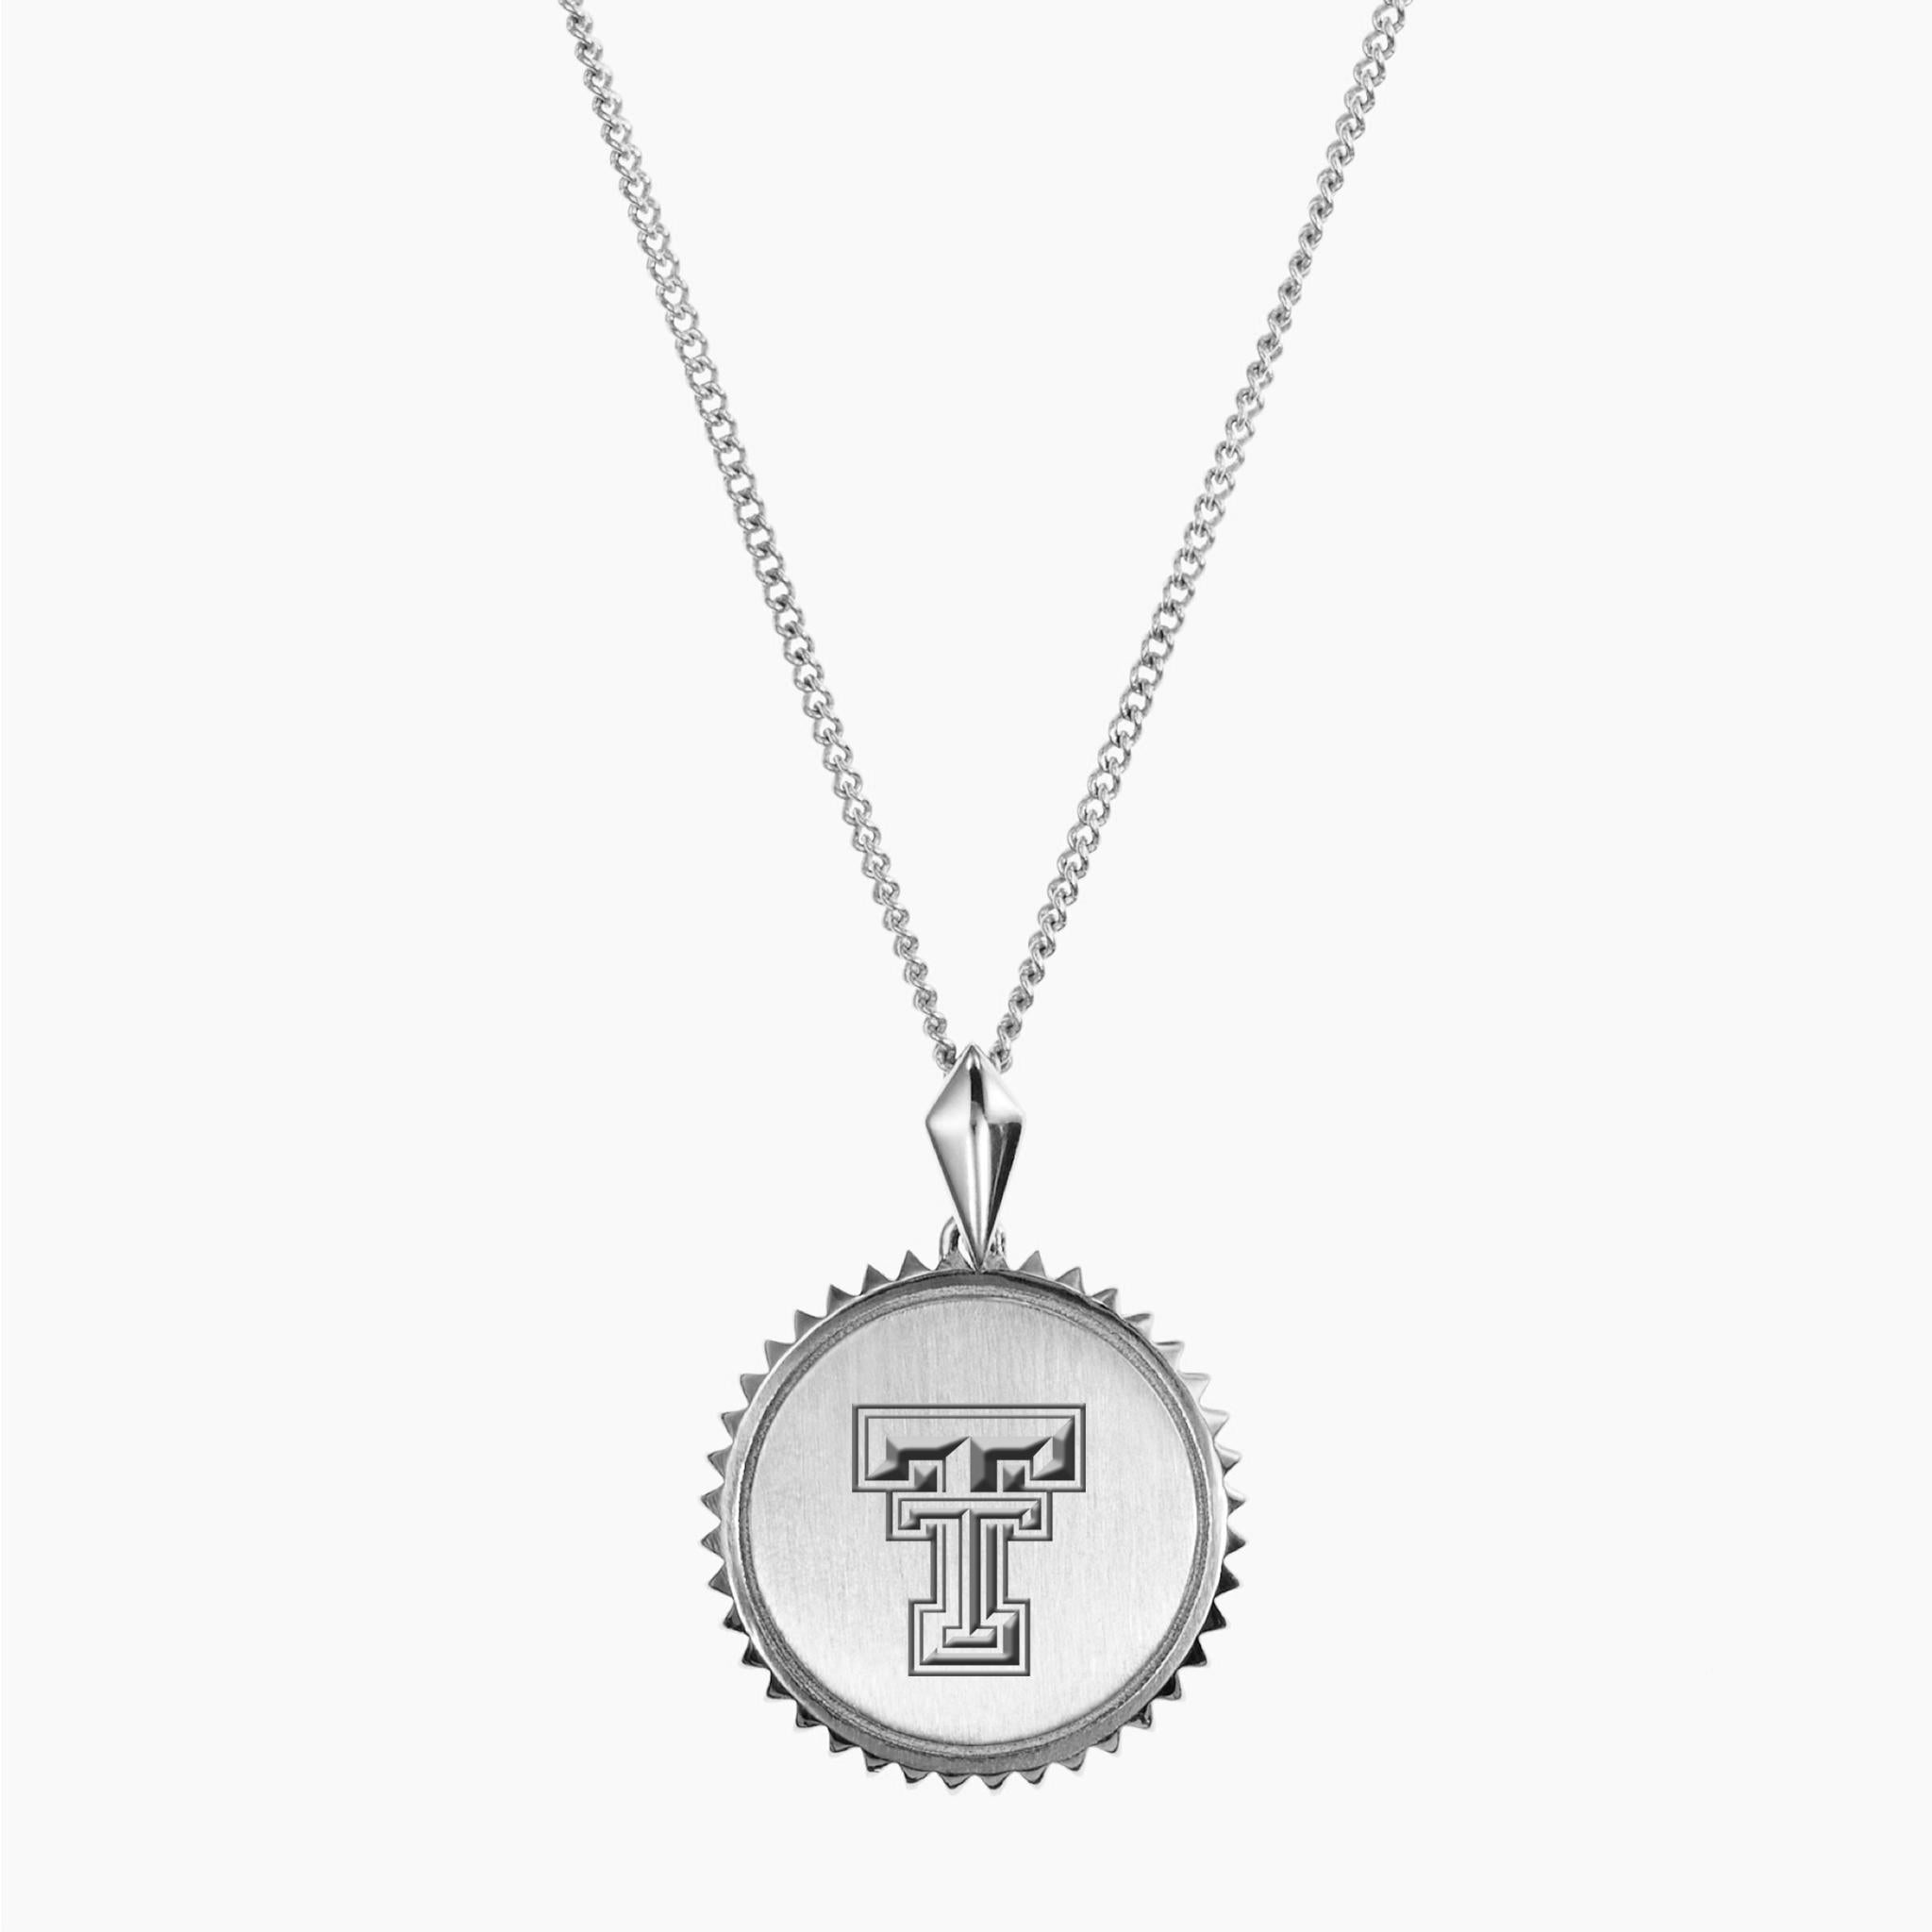 Officially Licensed TROY TROJANS Necklace With Football, Love and Logo  Pewter Charms Sterling Plated Troy University - Etsy